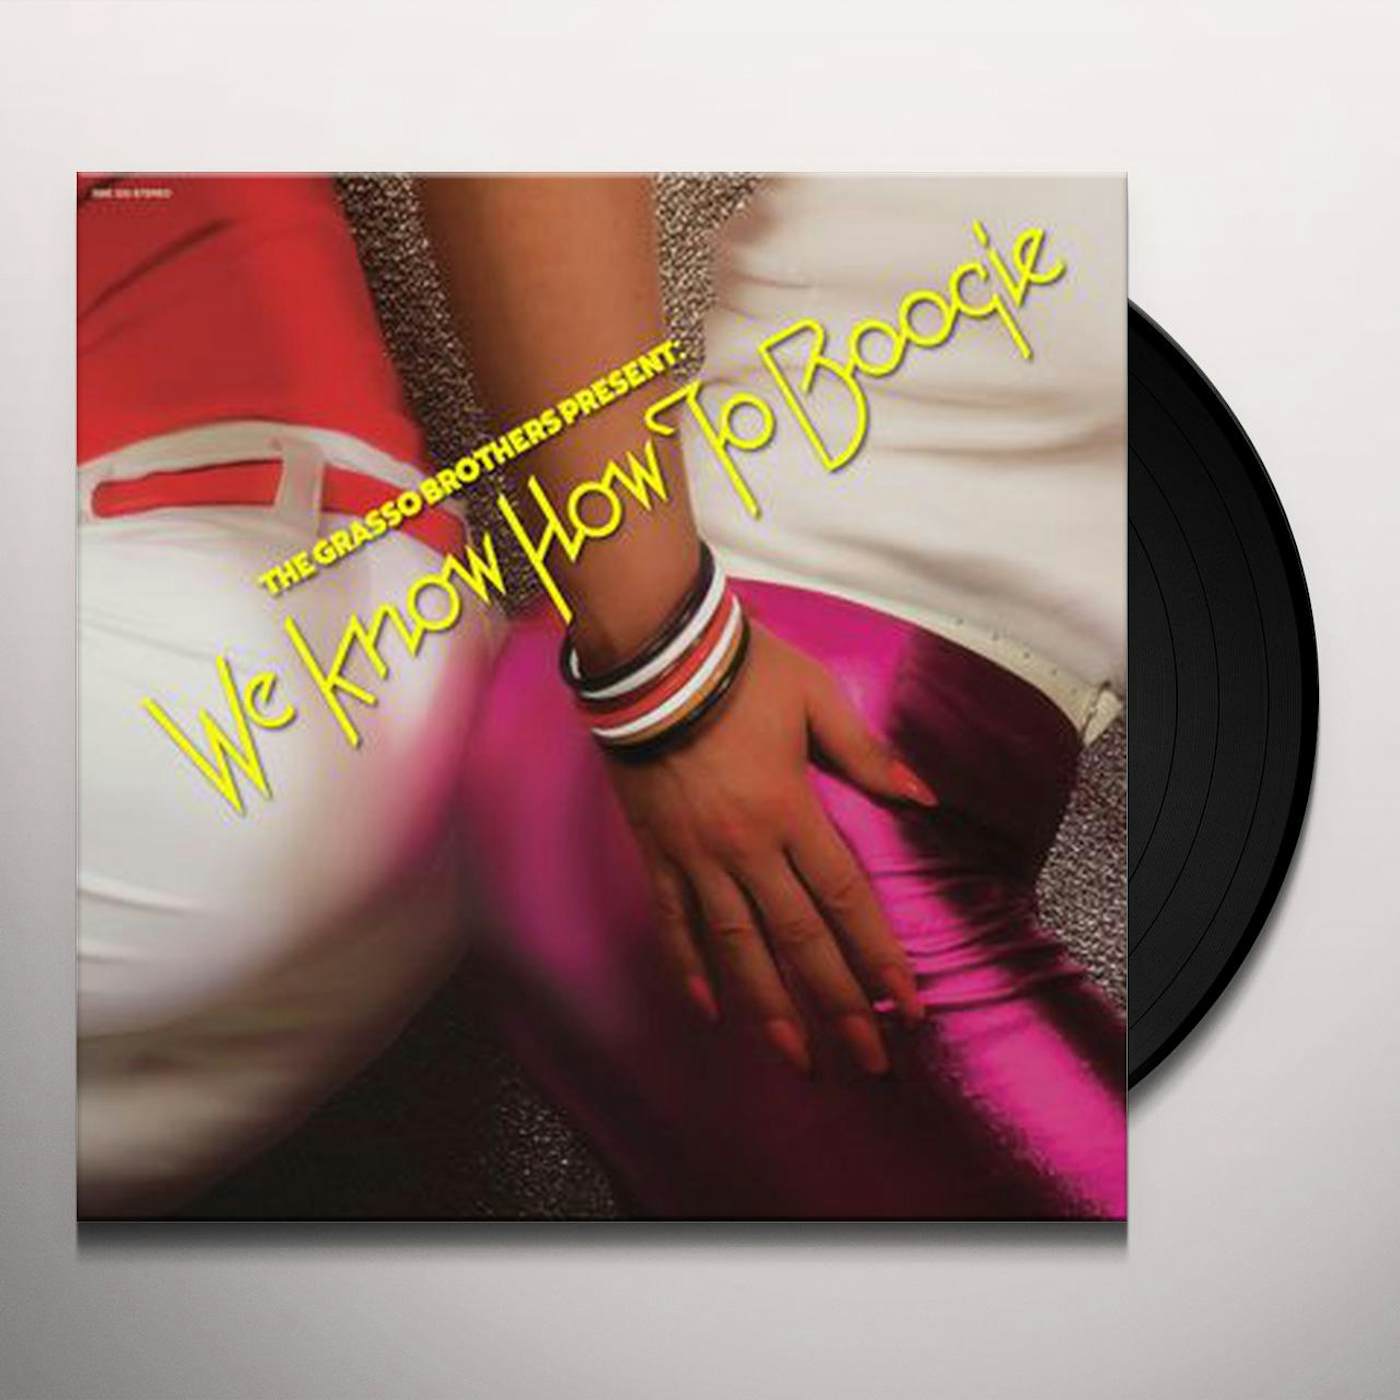 WE KNOW HOW TO BOOGIE / VARIOUS Vinyl Record